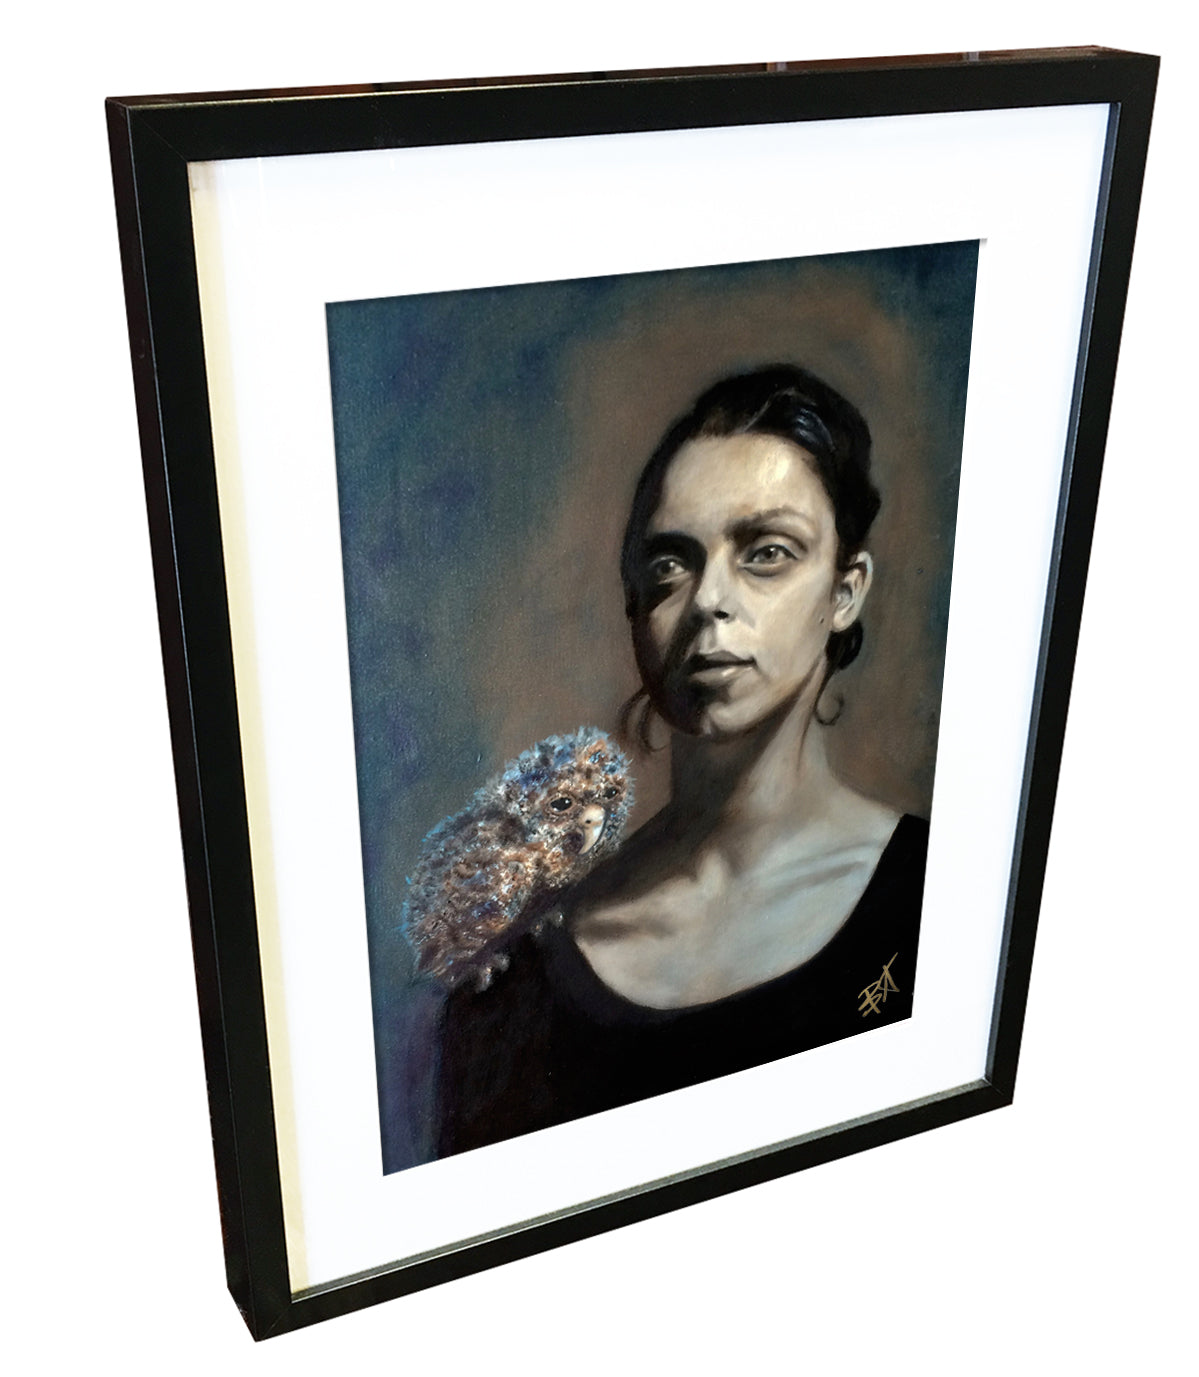 Sara (The Girl and the Owlet) by Baiba Auria - signed art print - Egoiste Gallery - Art Gallery in Manchester City Centre